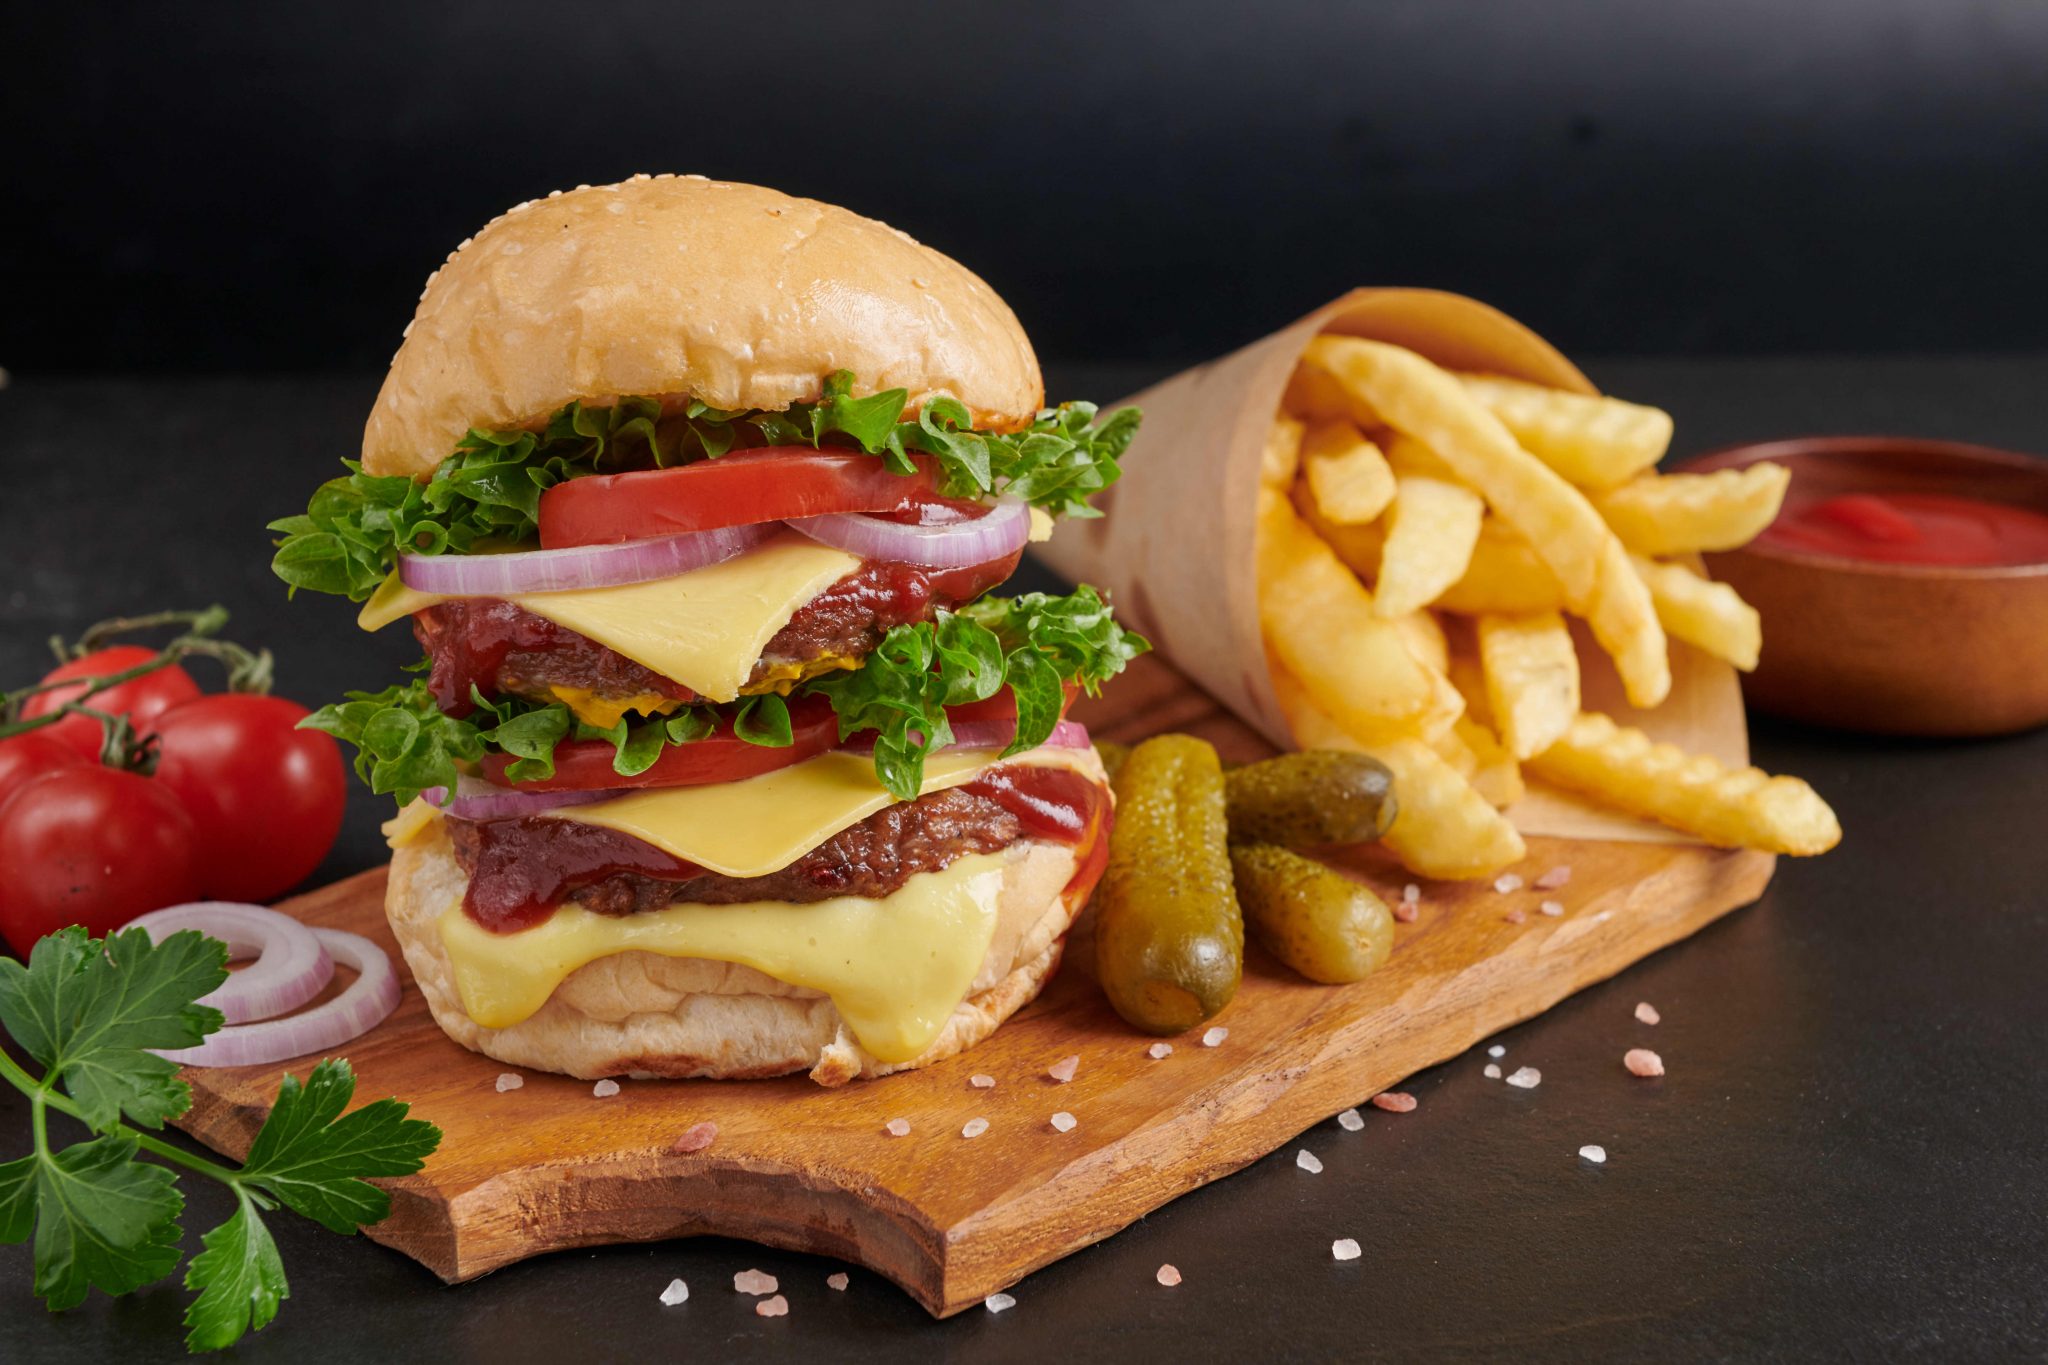 Homemade hamburger or burger with fresh vegetables and cheese lettuce and mayonnaise served, French fries on pieces of brown paper on black stone table . concept of fast food and junk food